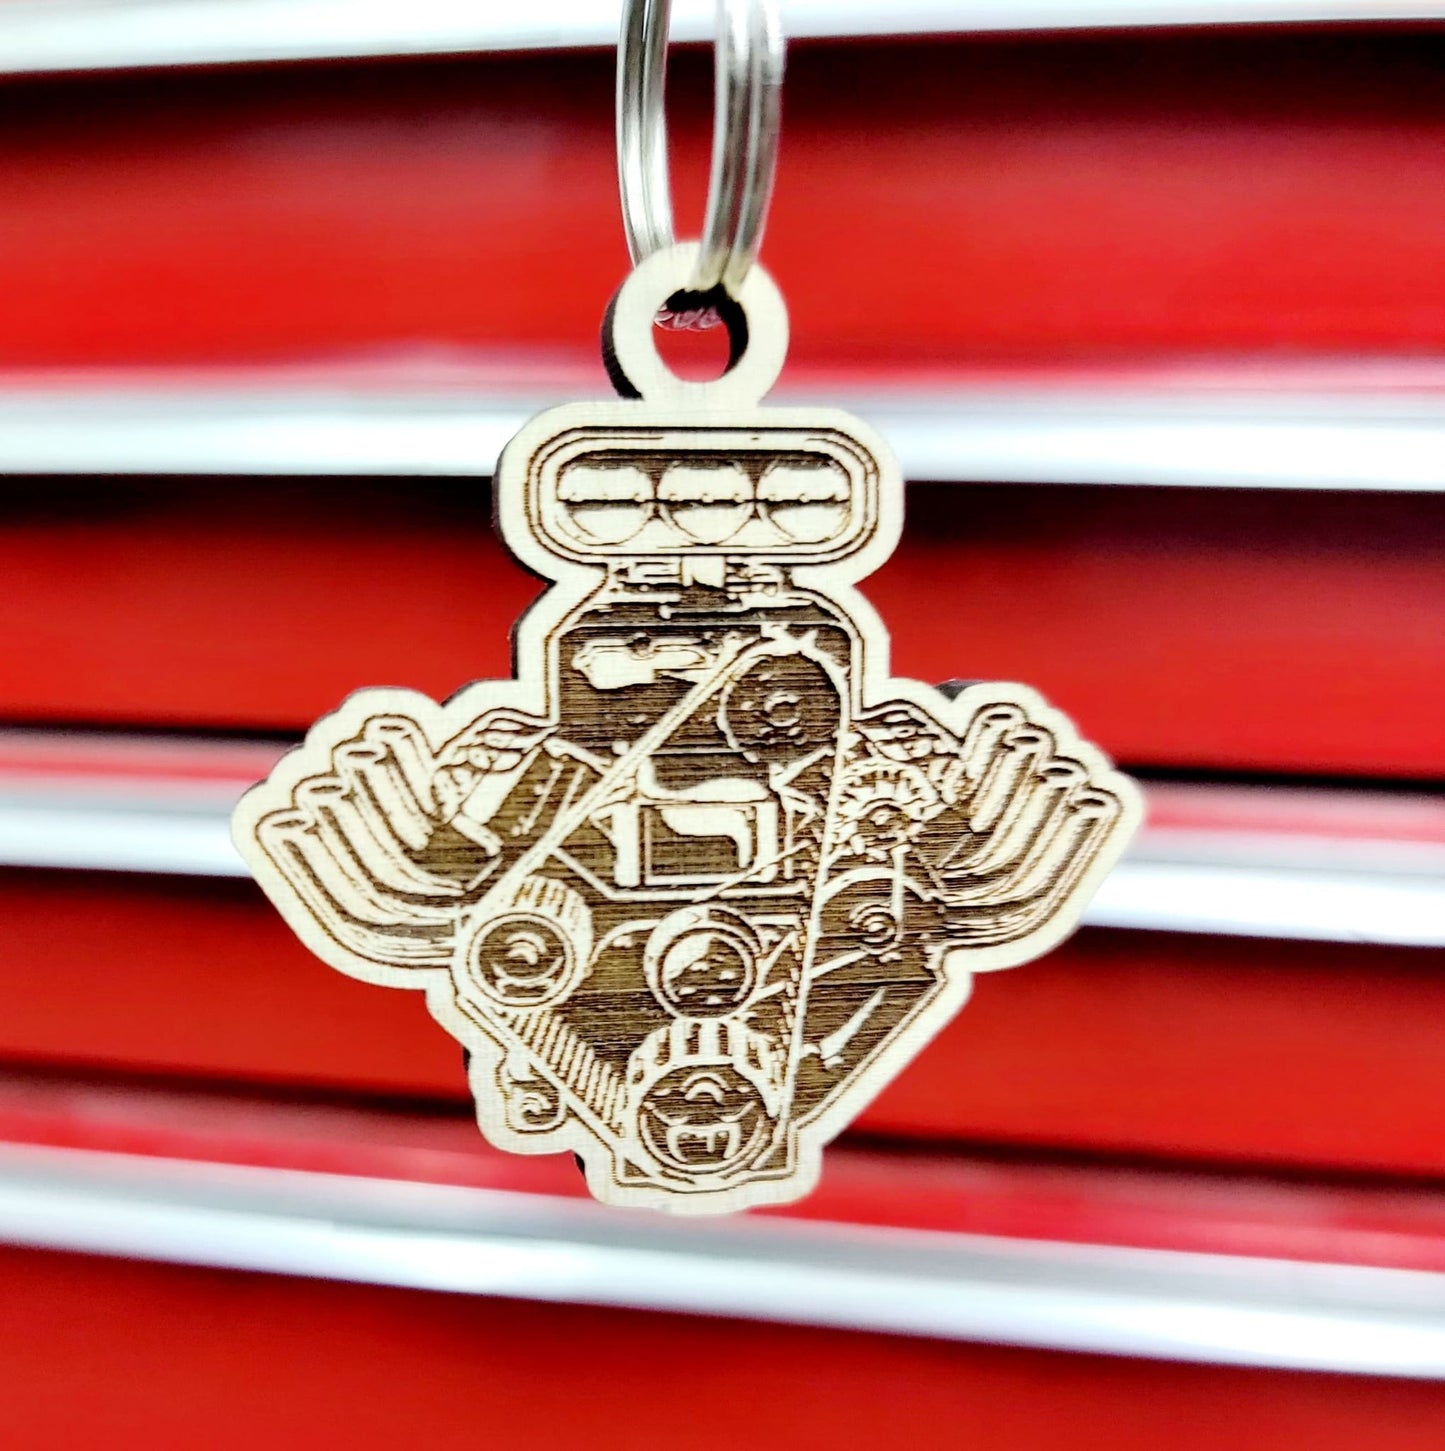 Blower Motor Engine Keychain Gifts For Him Manly